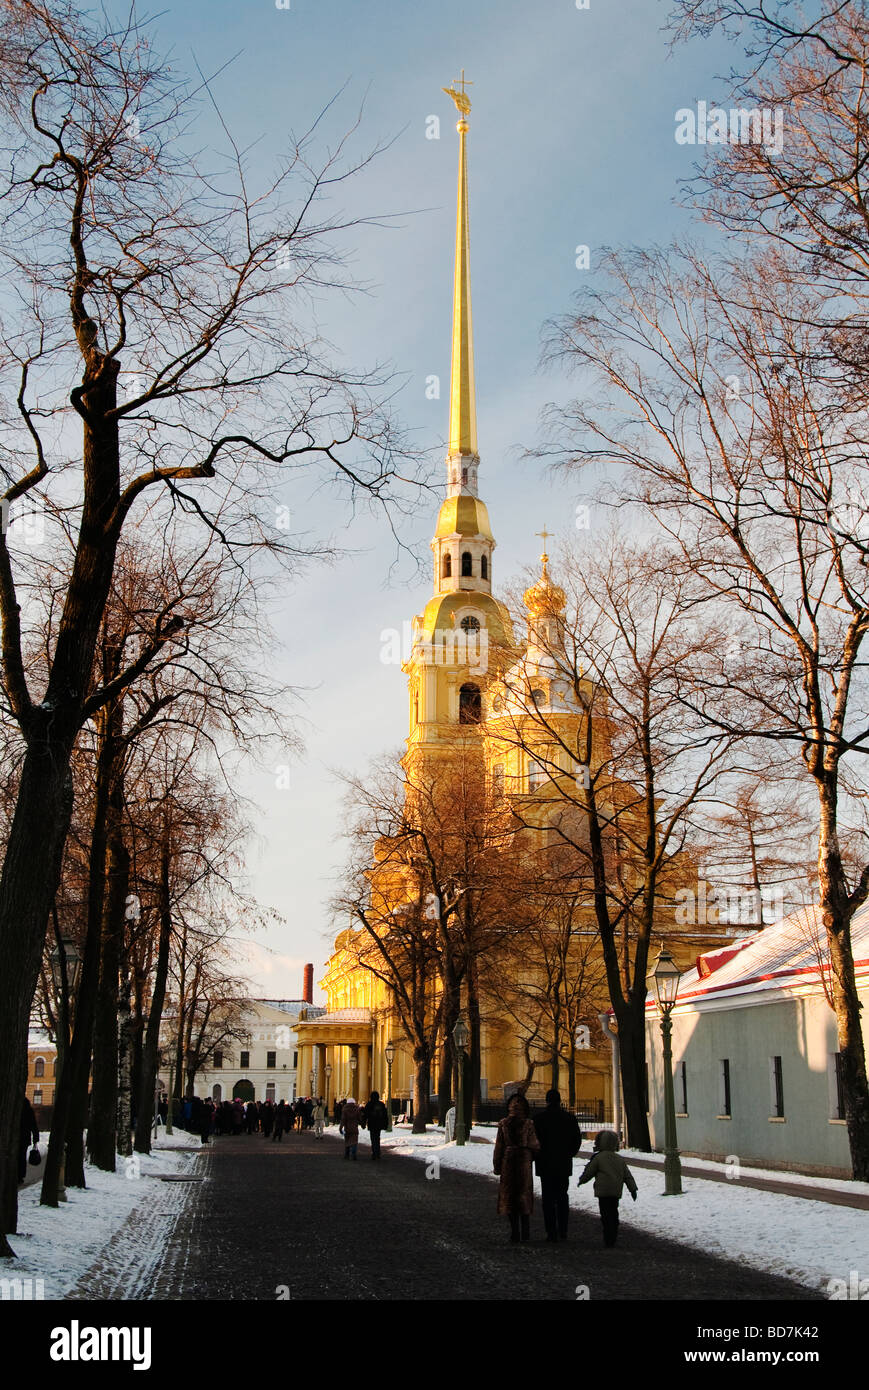 The Peter and Paul Cathedral, Saint Petersburg, Russia Stock Photo